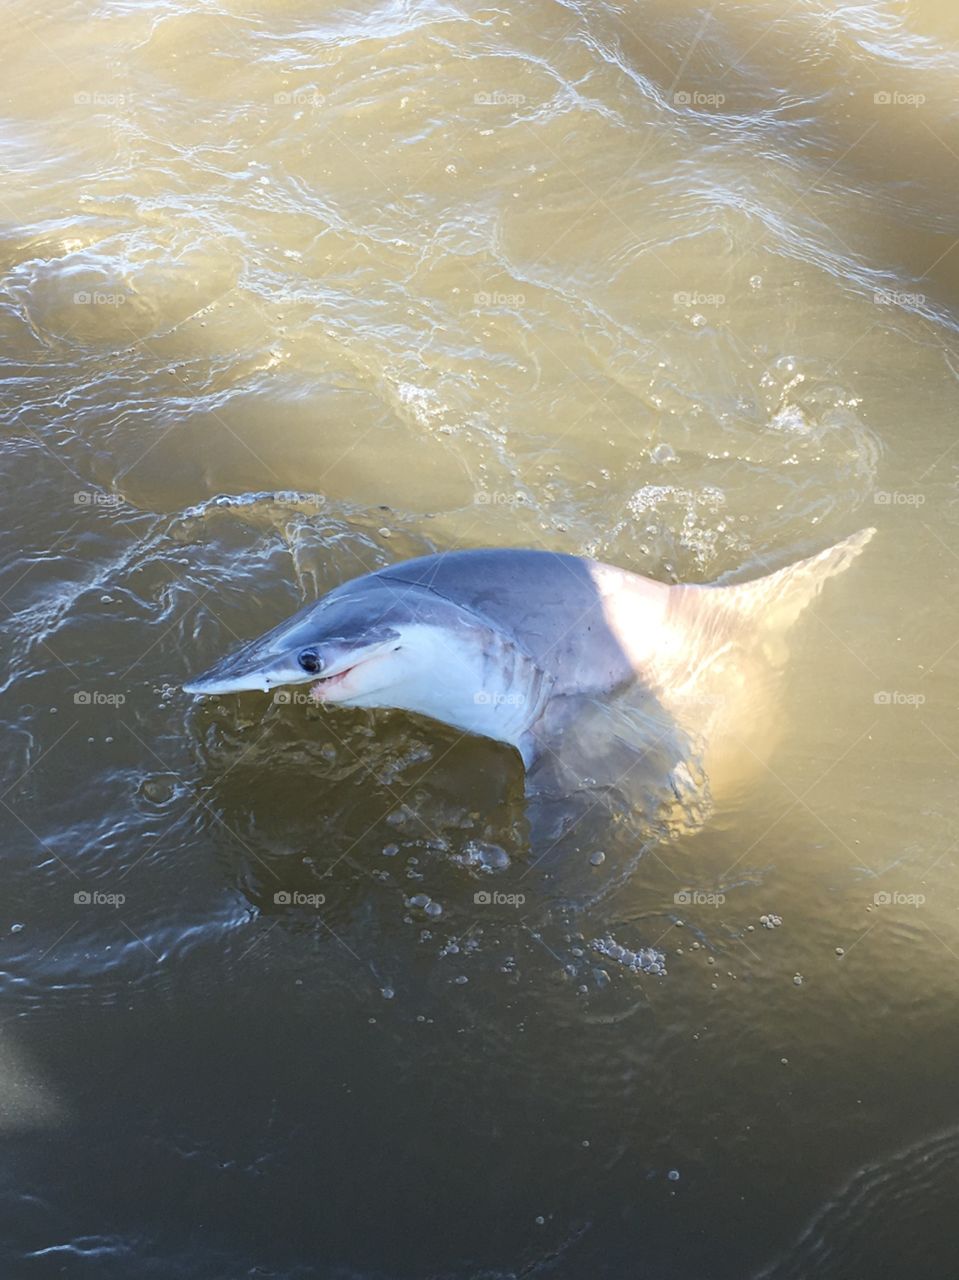 Fishing at the Georgia coast and we saw this beautiful shark! He was a tough guy to get off the hook! 